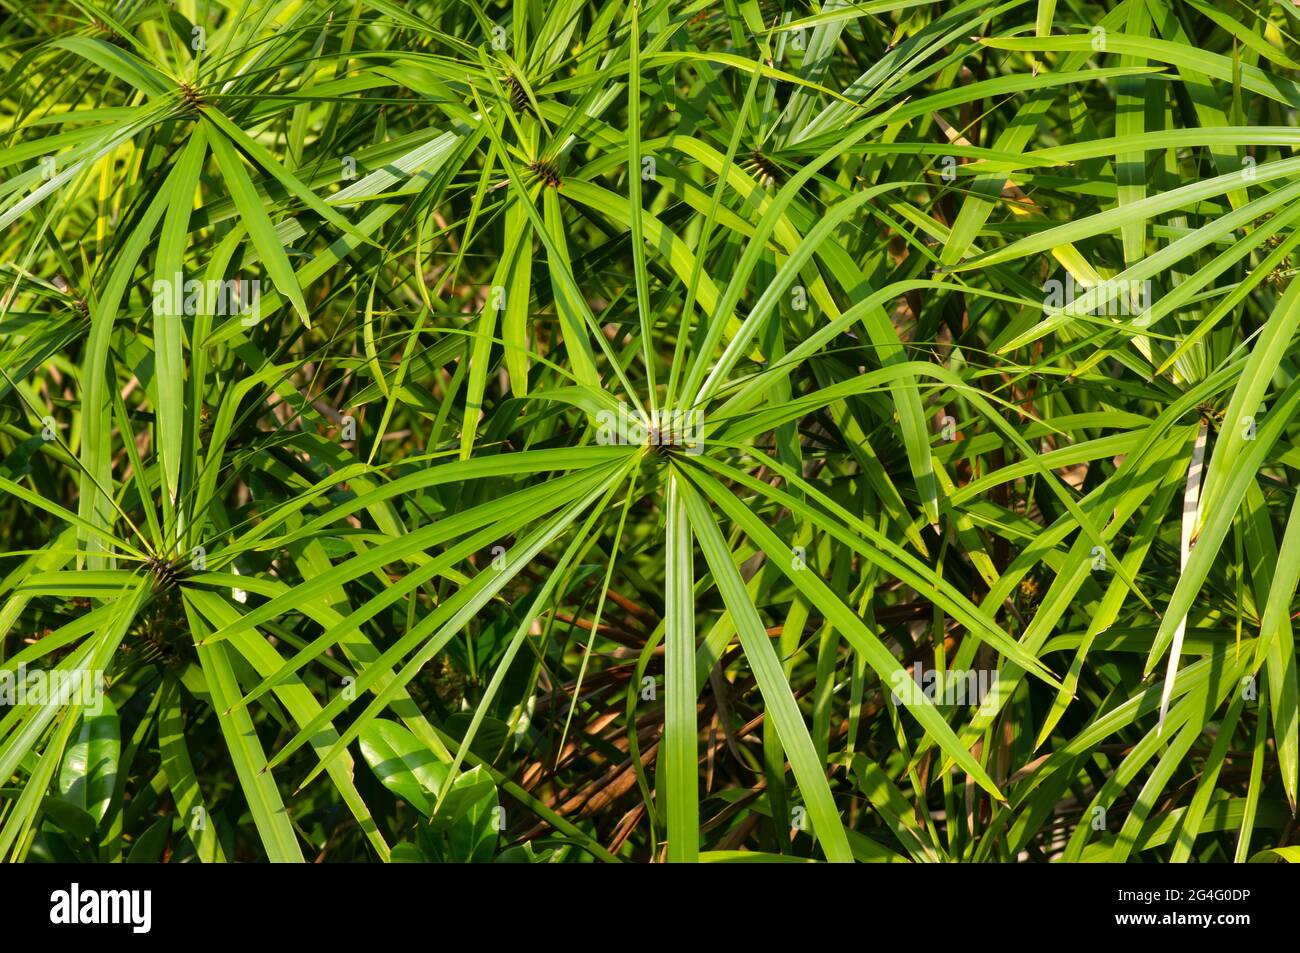 Cyperus Alternifolius (Umbrella Papyrus), selected focus, a popular houseplant with many varieties and pretty leaves, natural background Stock Photo